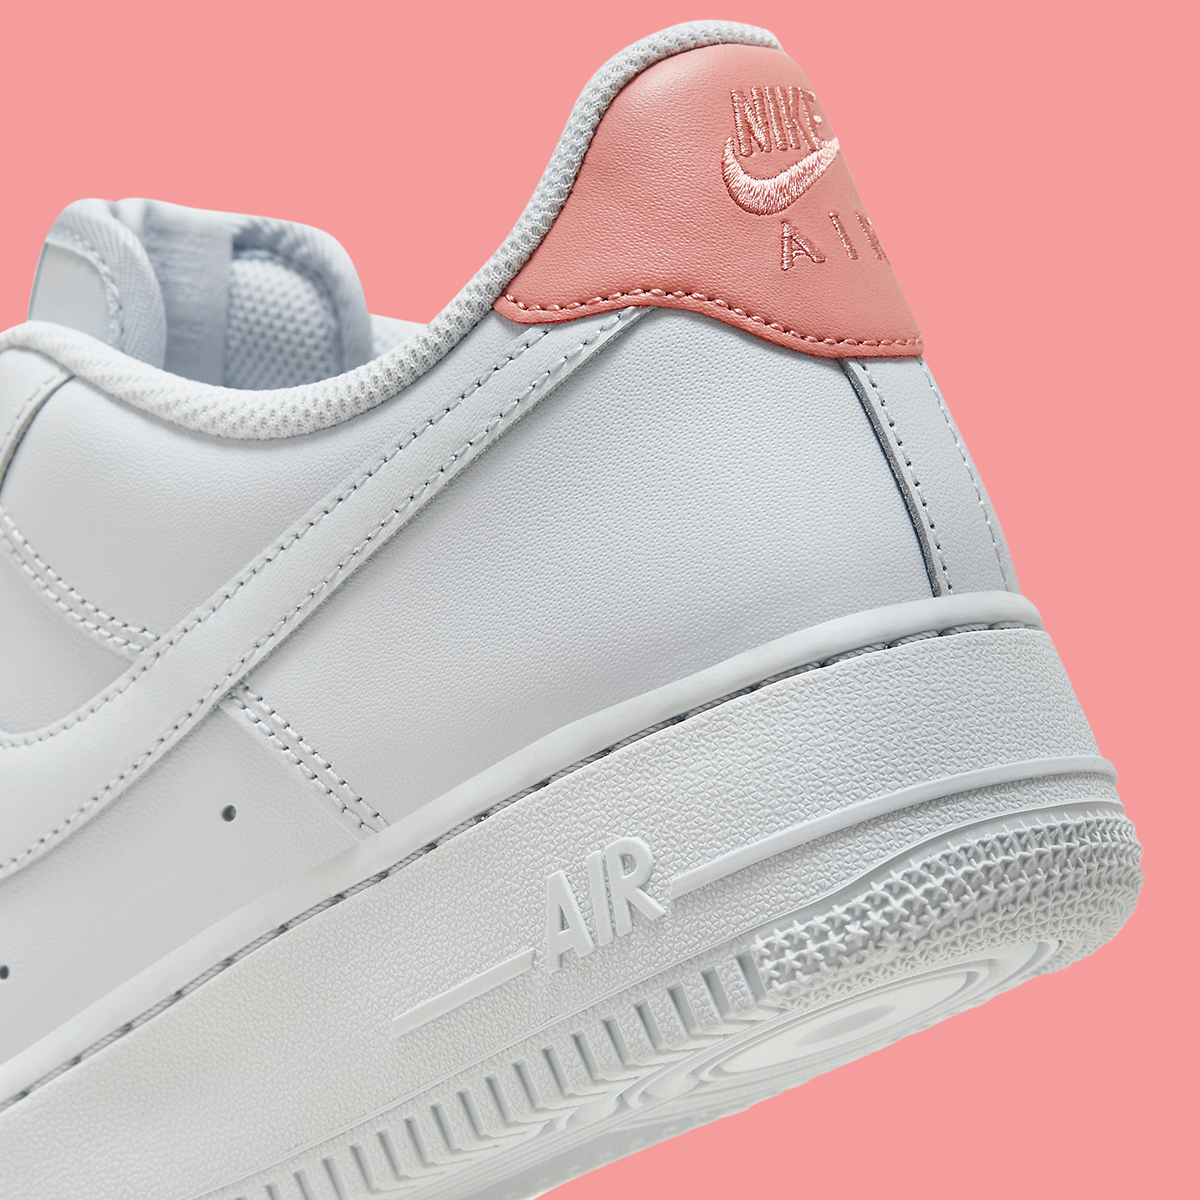 Nike Air Force 1 Low White Dusty Rose Hf0729 001 3